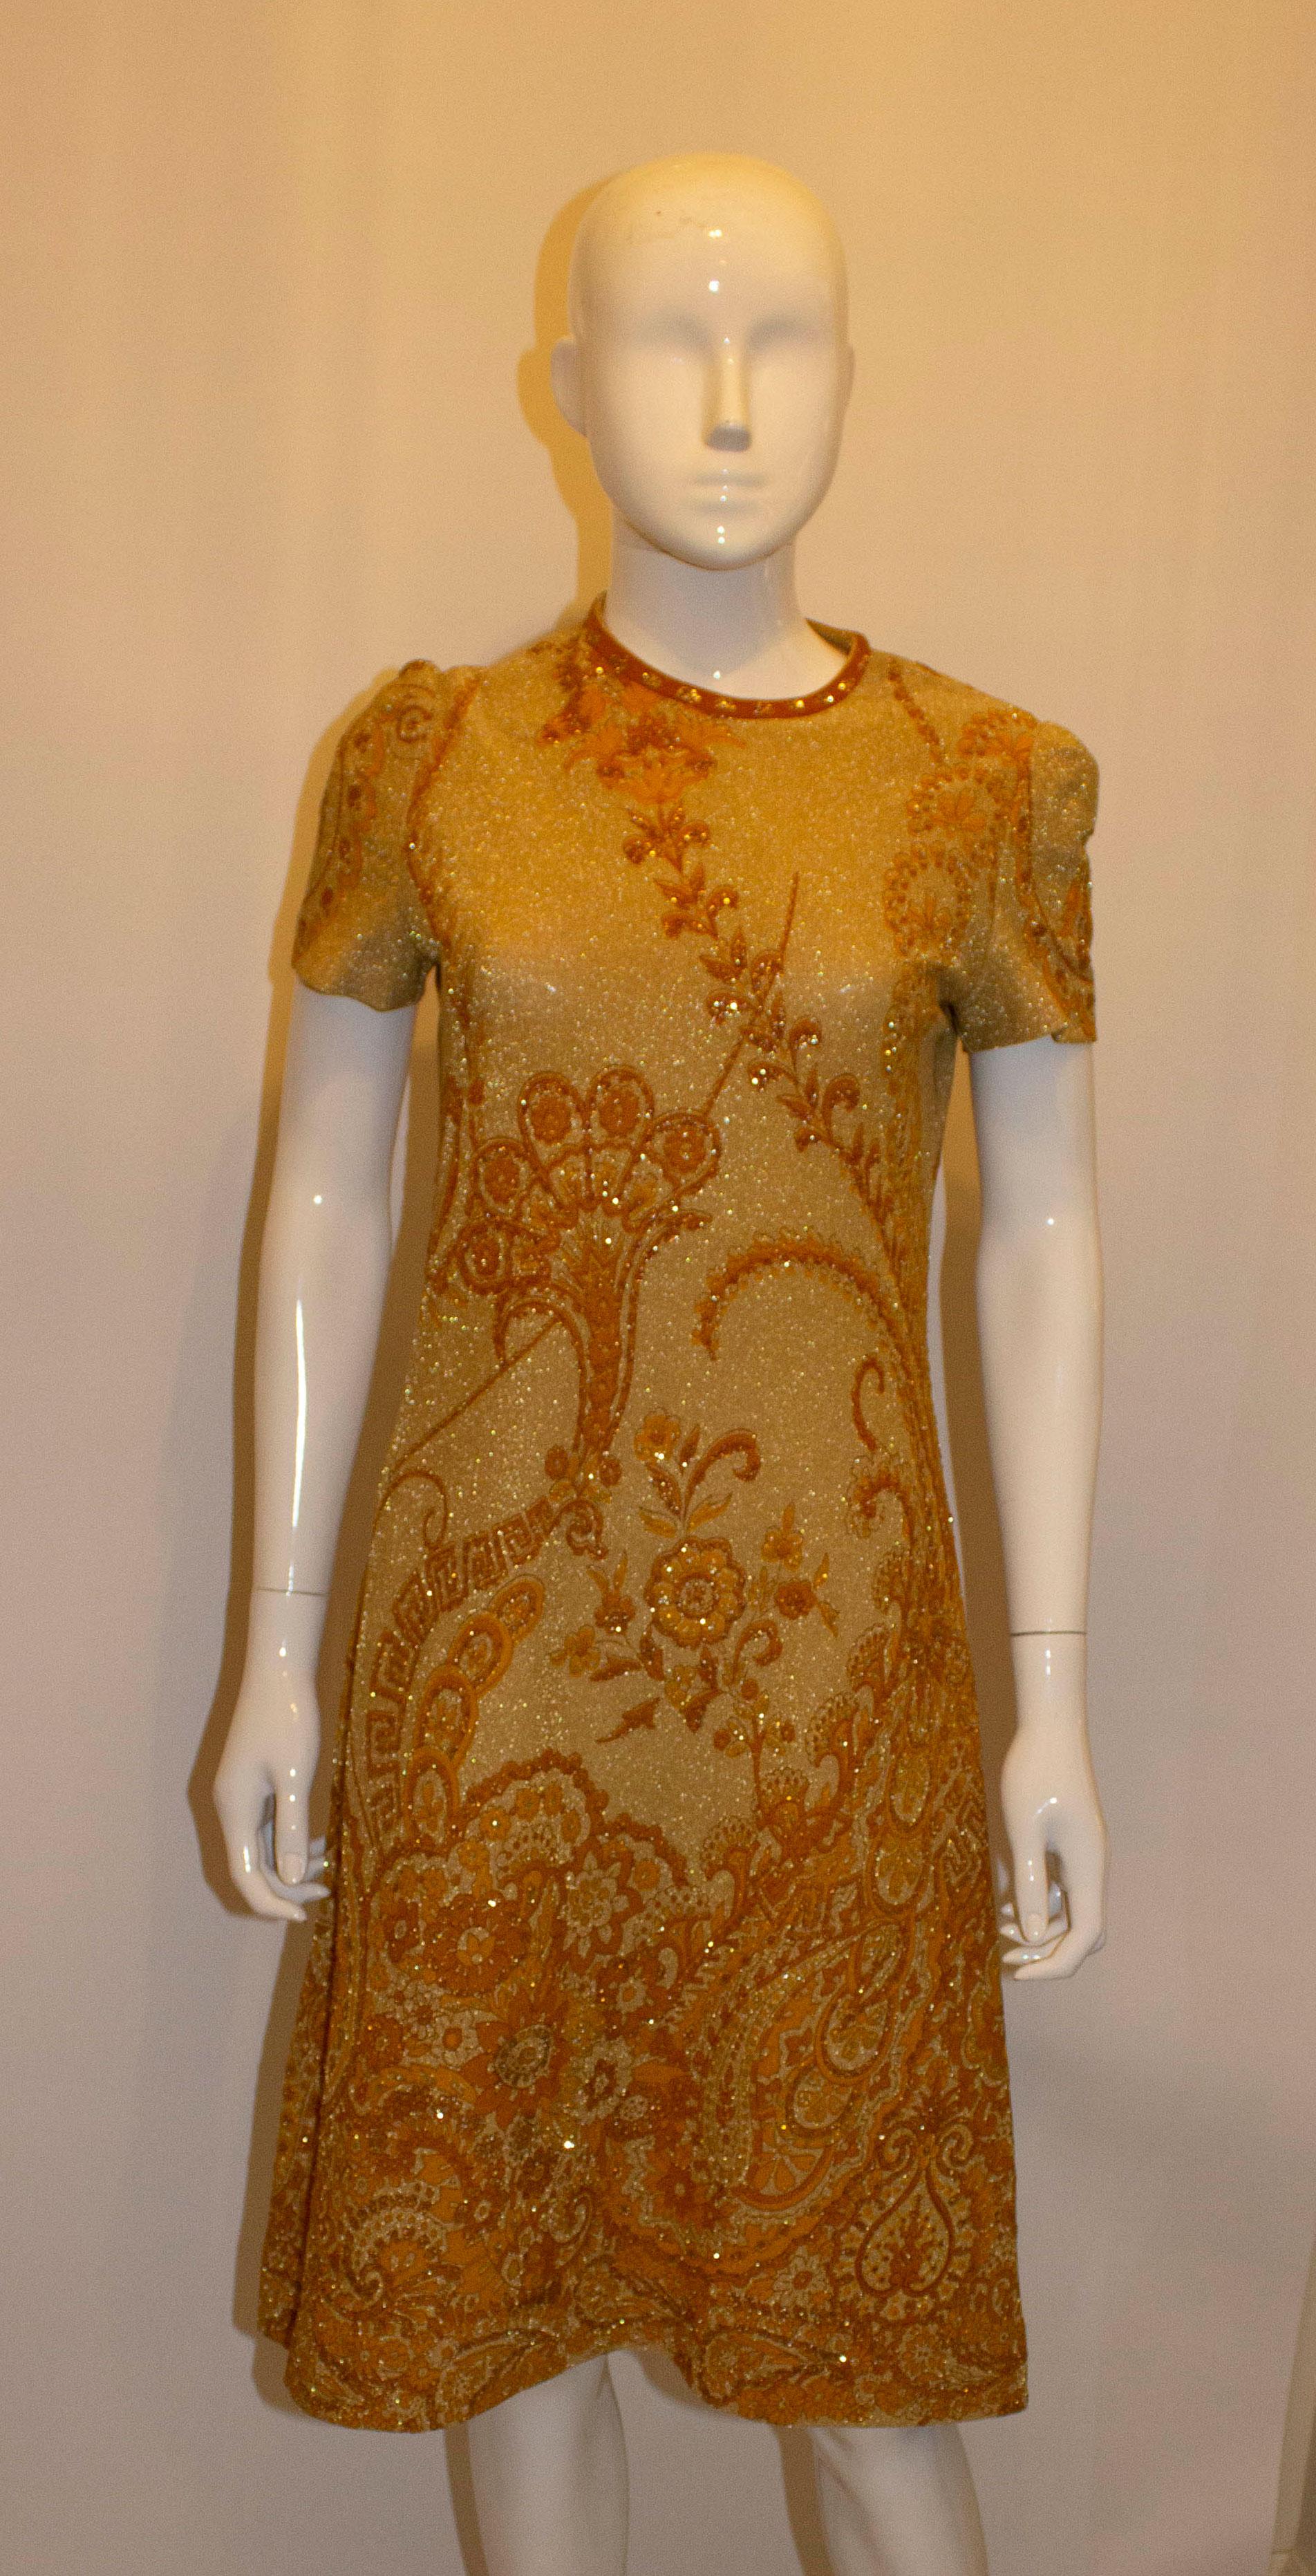 A chic vintage cocktail dress by Tricosa. The dress is in a soft gold colour with brunt orange print.  It has a round neckline, central back zip, and is unlined. 
Measurements: Bust 35'', length 41 '' plus hem 1 3/4''